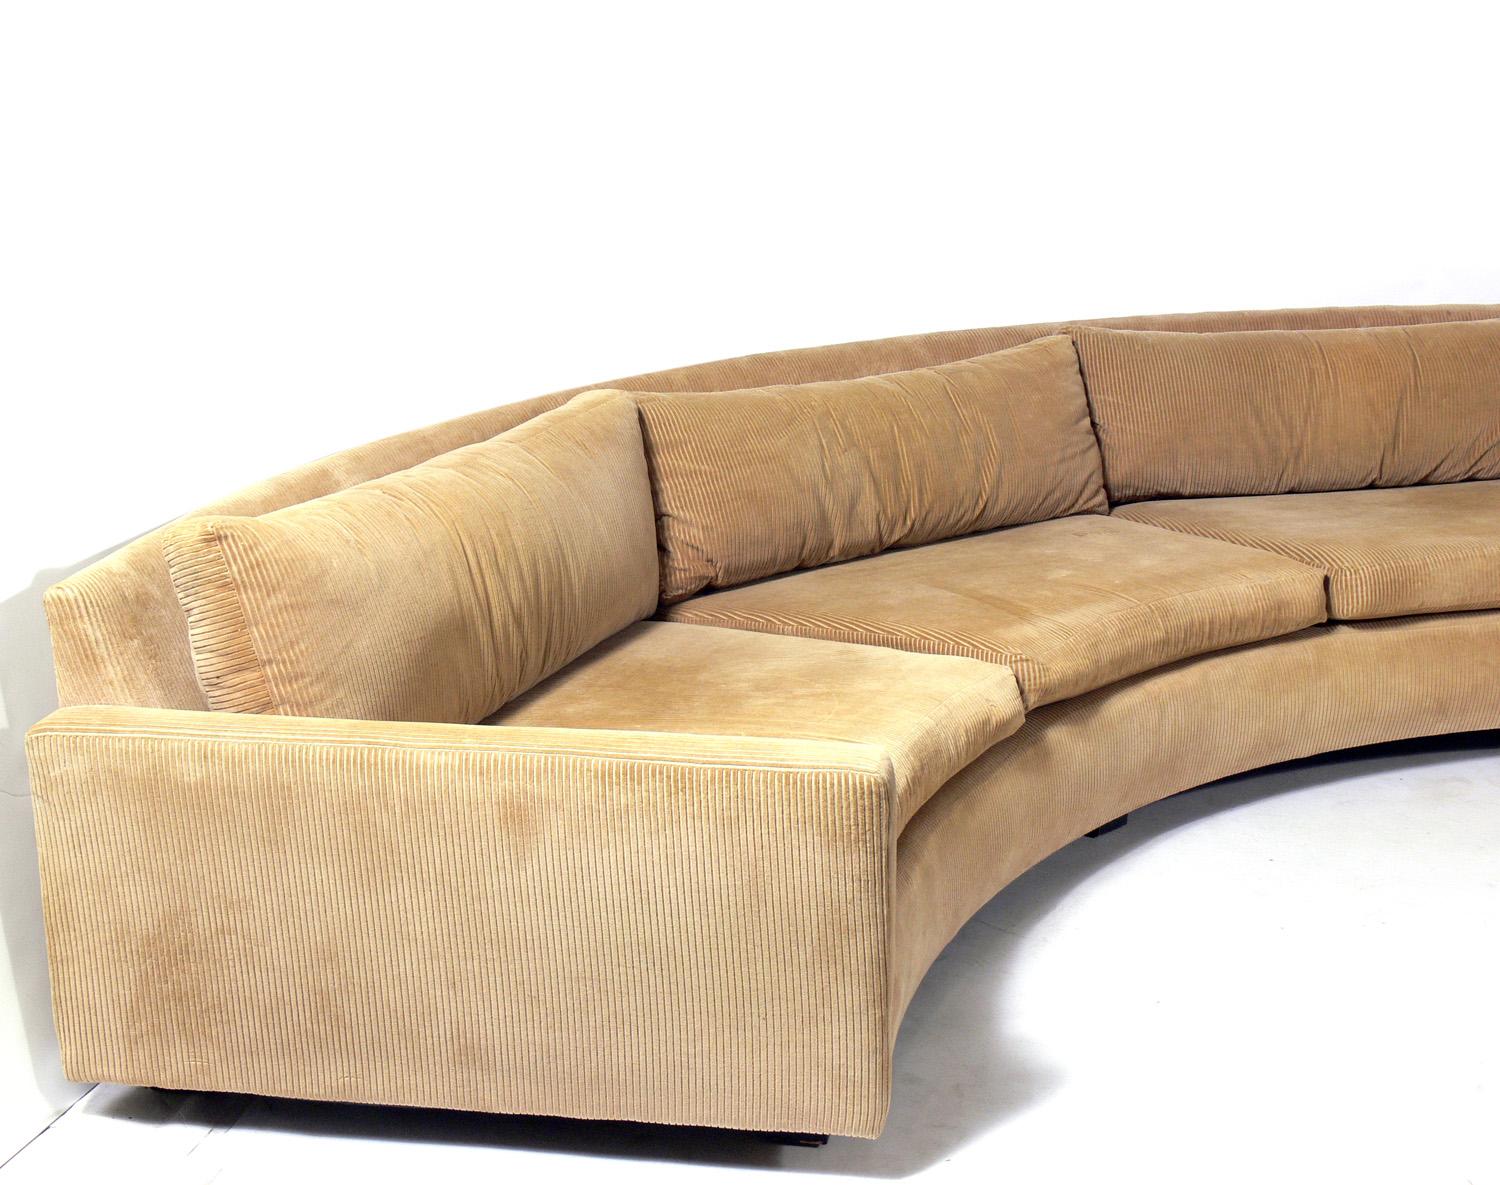 Large scale curved sectional sofa, designed by Milo Baughman for Thayer Coggin, American, circa 1960s. It is a two section sofa for easier moving. This sofa is currently being reupholstered and refinished and can be completed in your fabric. The